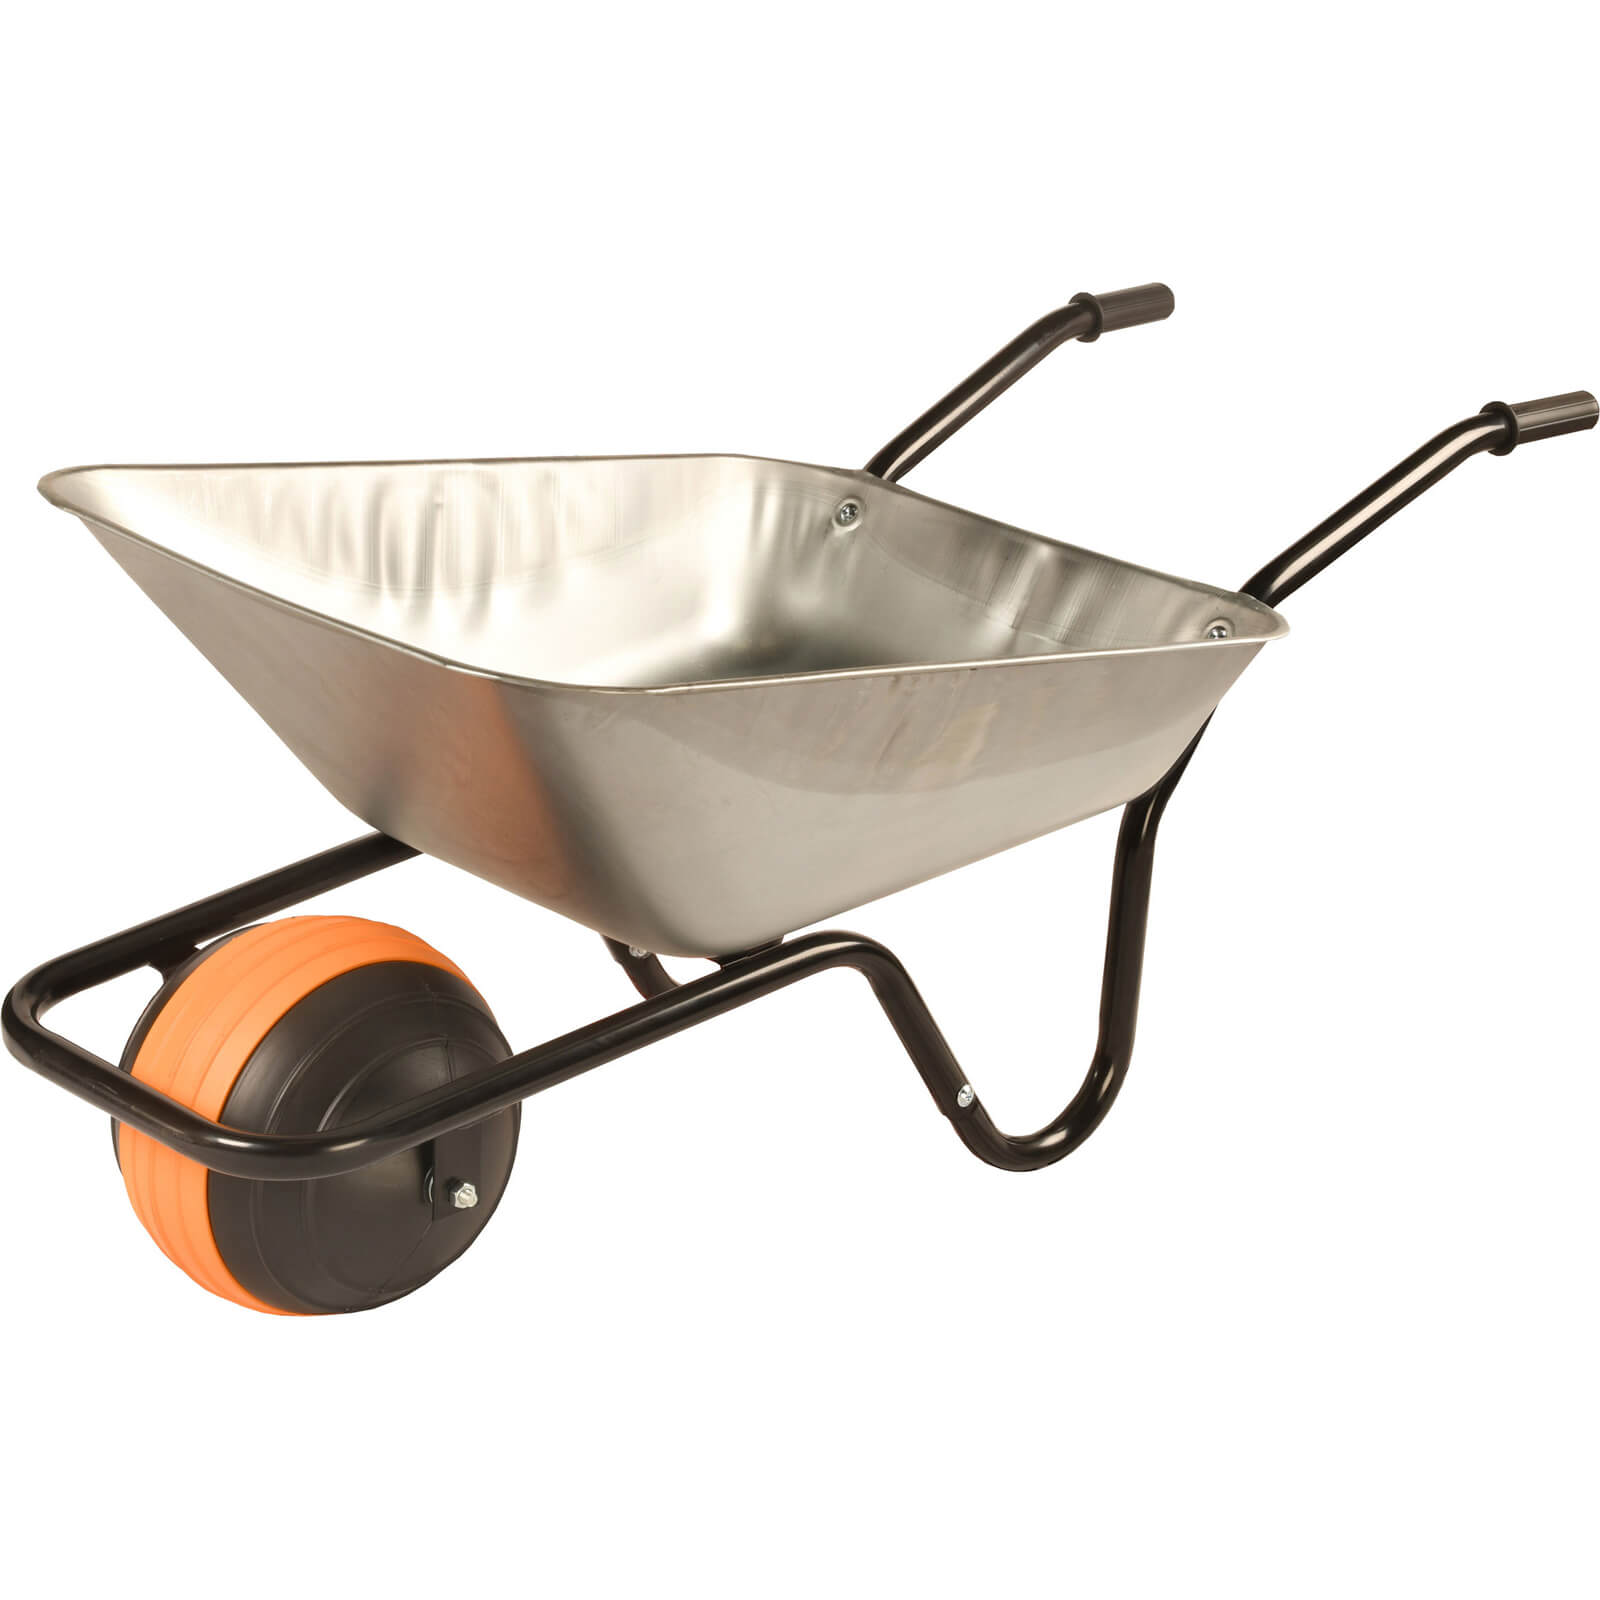 Image of Walsall The Duraball Puncture Proof Ball Wheelbarrow 85l Galvanized Steel